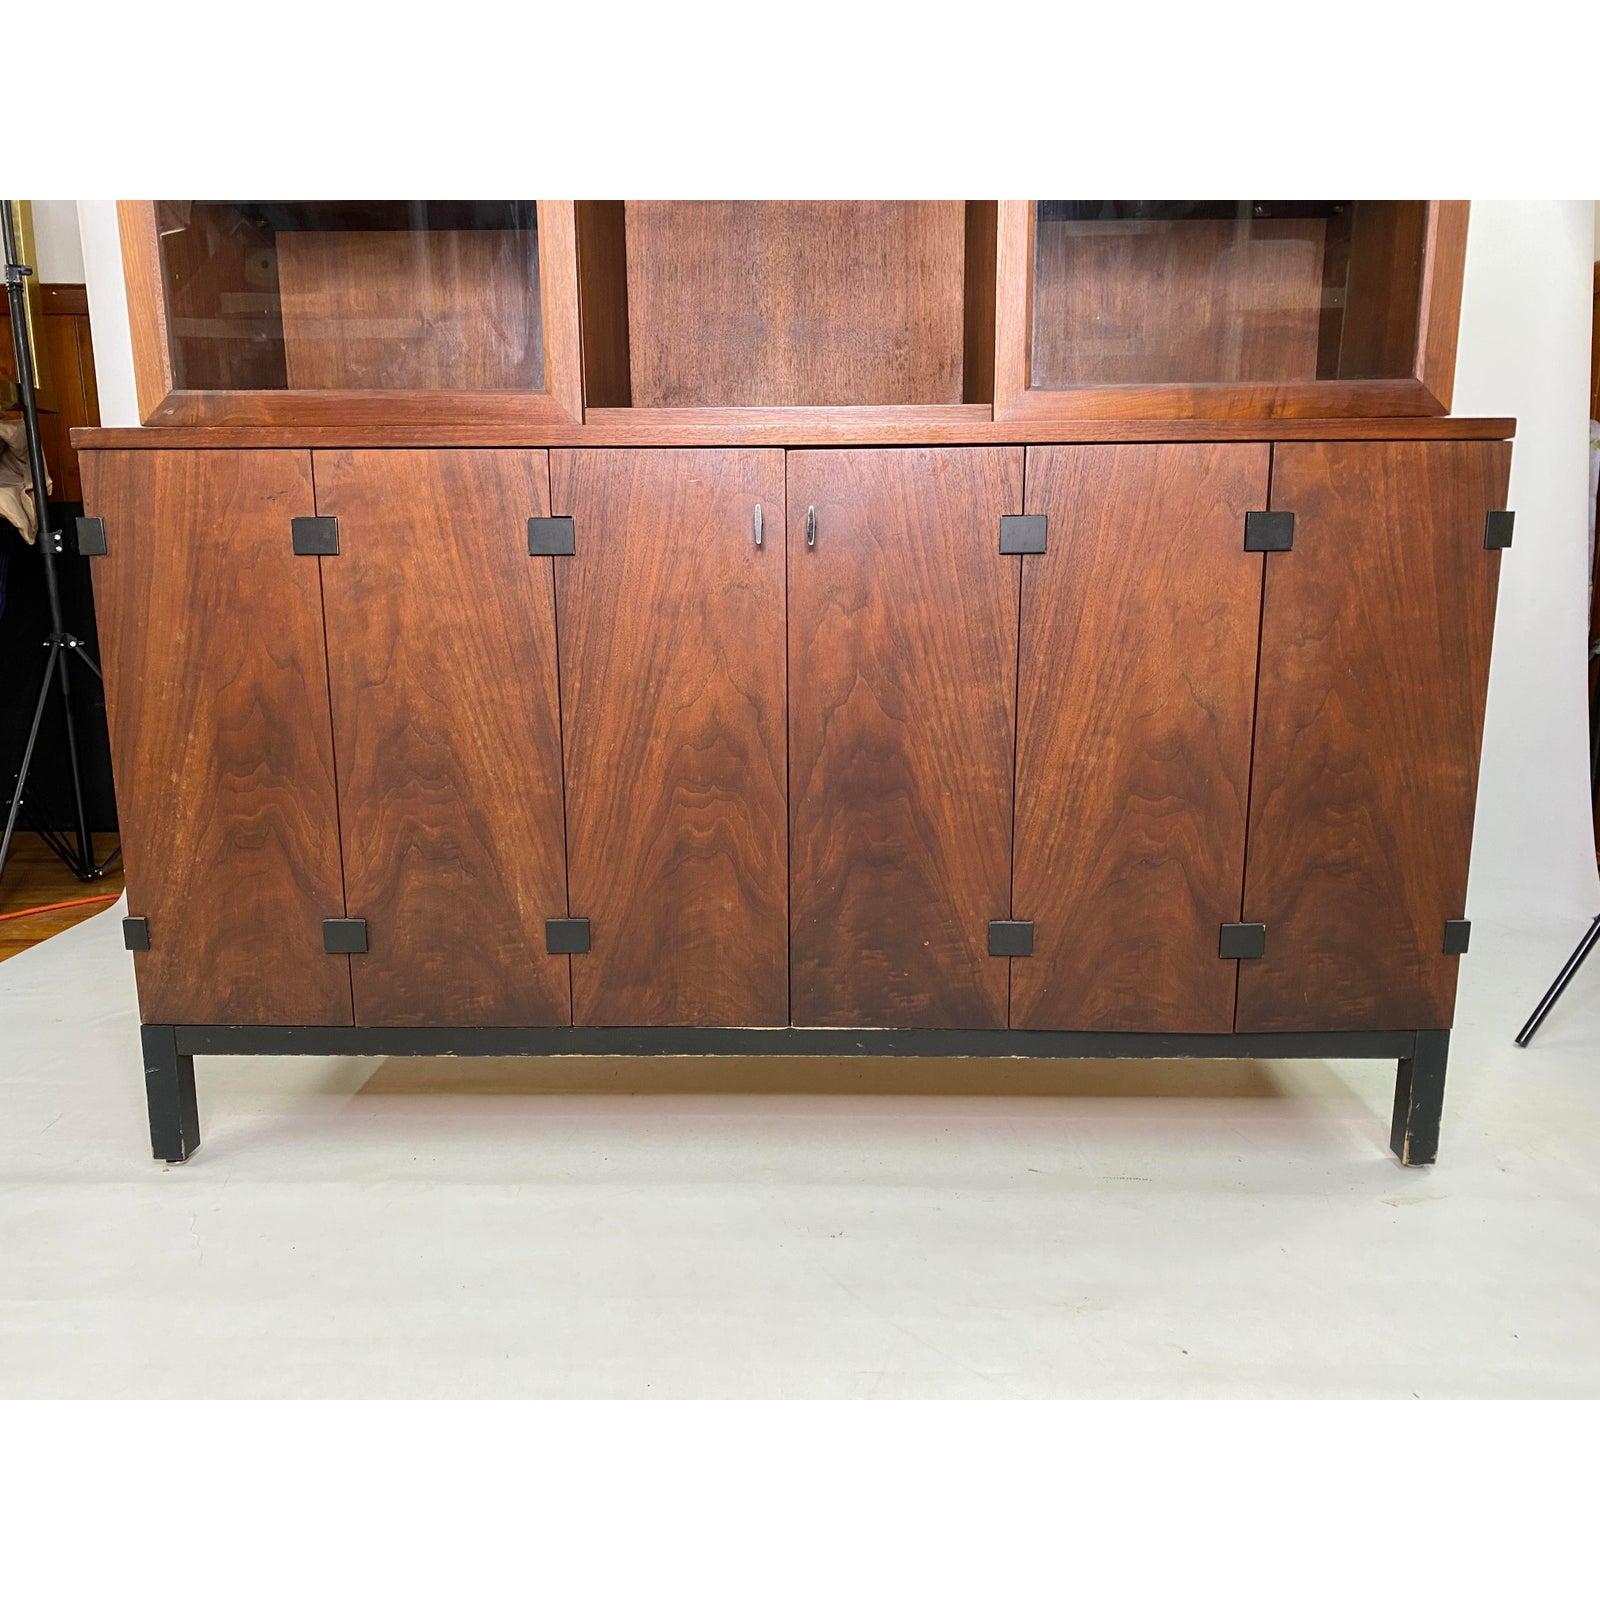 Mid-century walnut hutch / China cabinet by Milo Baughman for Directional.